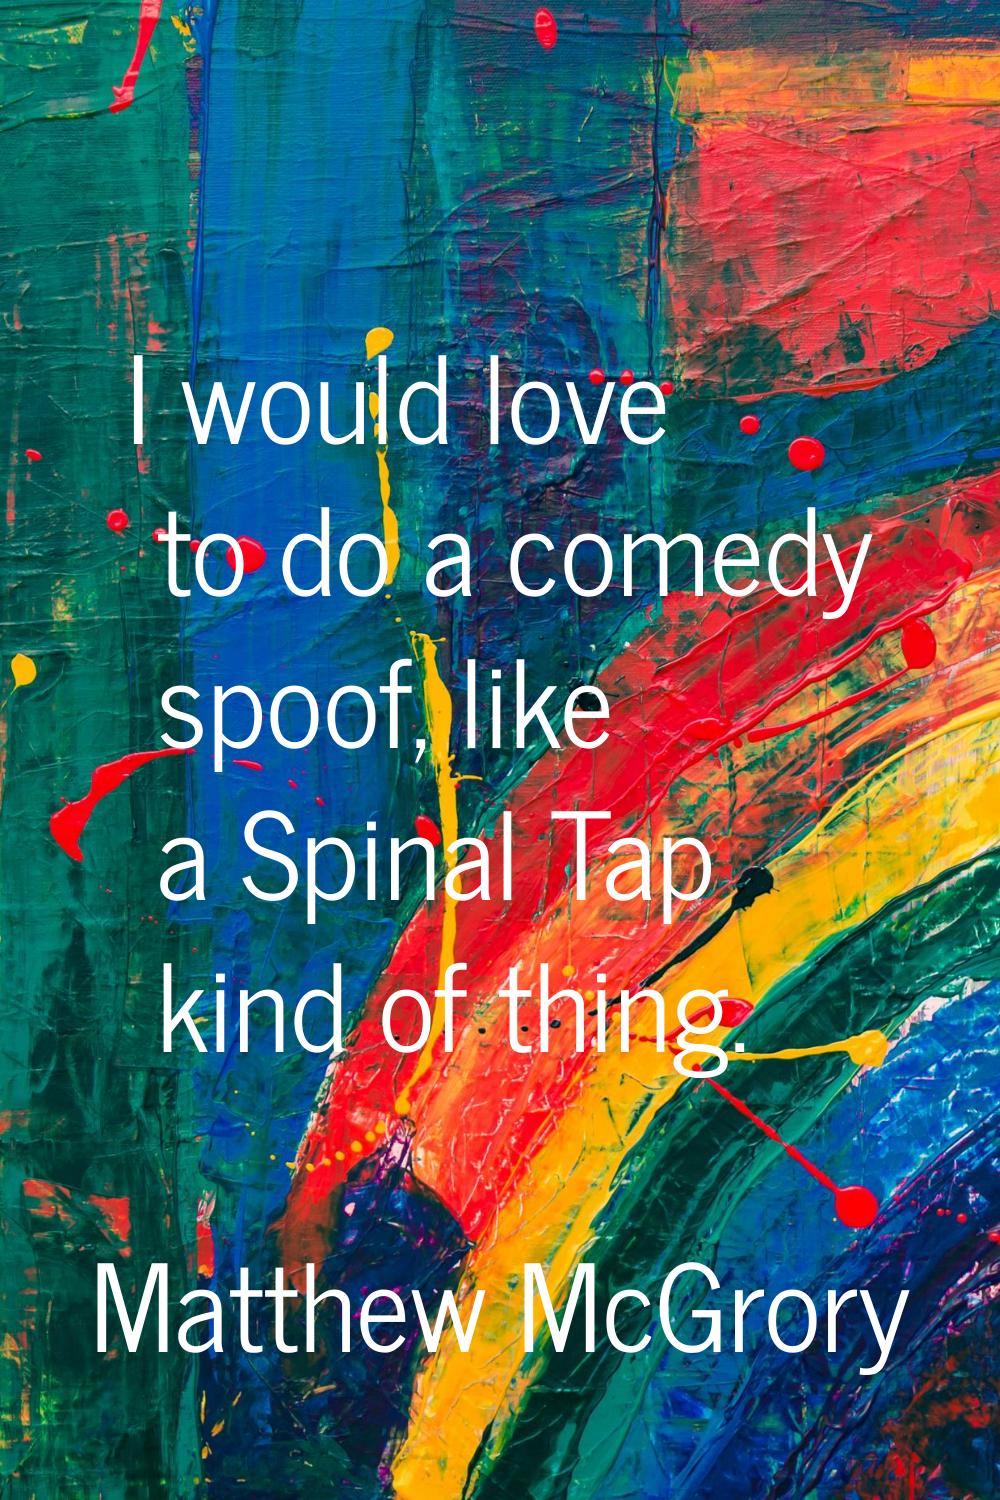 I would love to do a comedy spoof, like a Spinal Tap kind of thing.